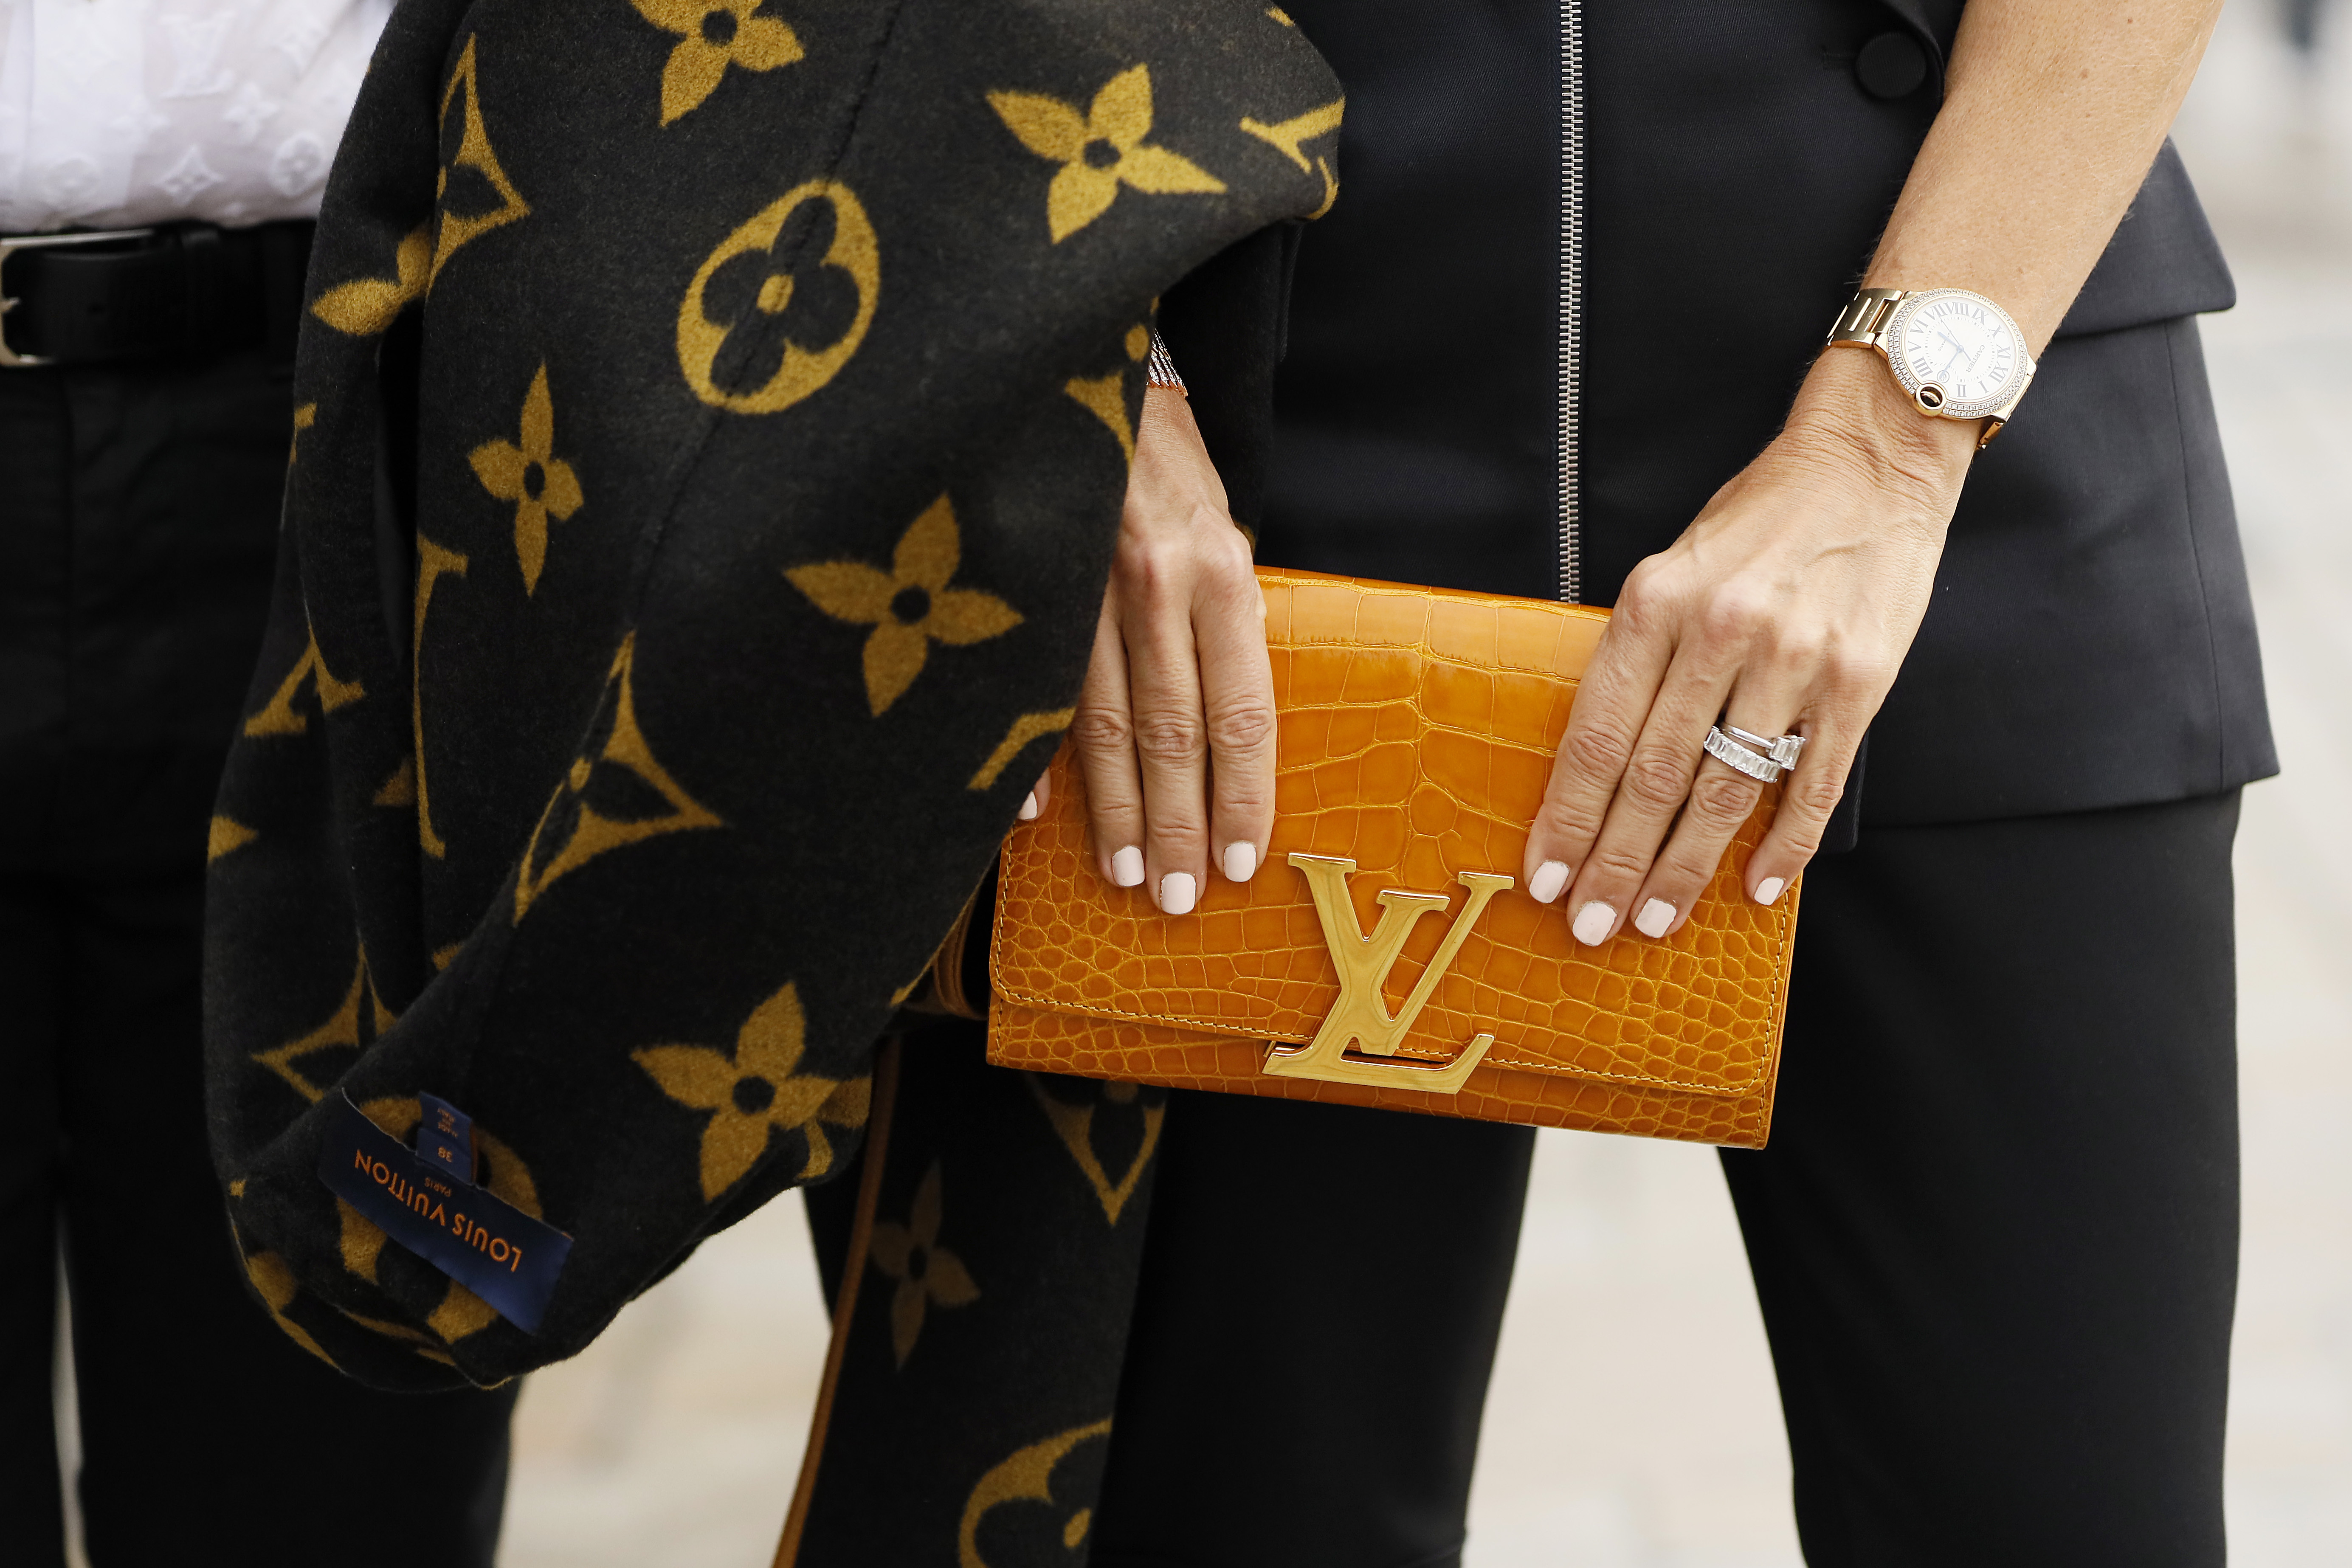 How Well Do You Know Louis Vuitton? Take Our Quiz to Find Out!